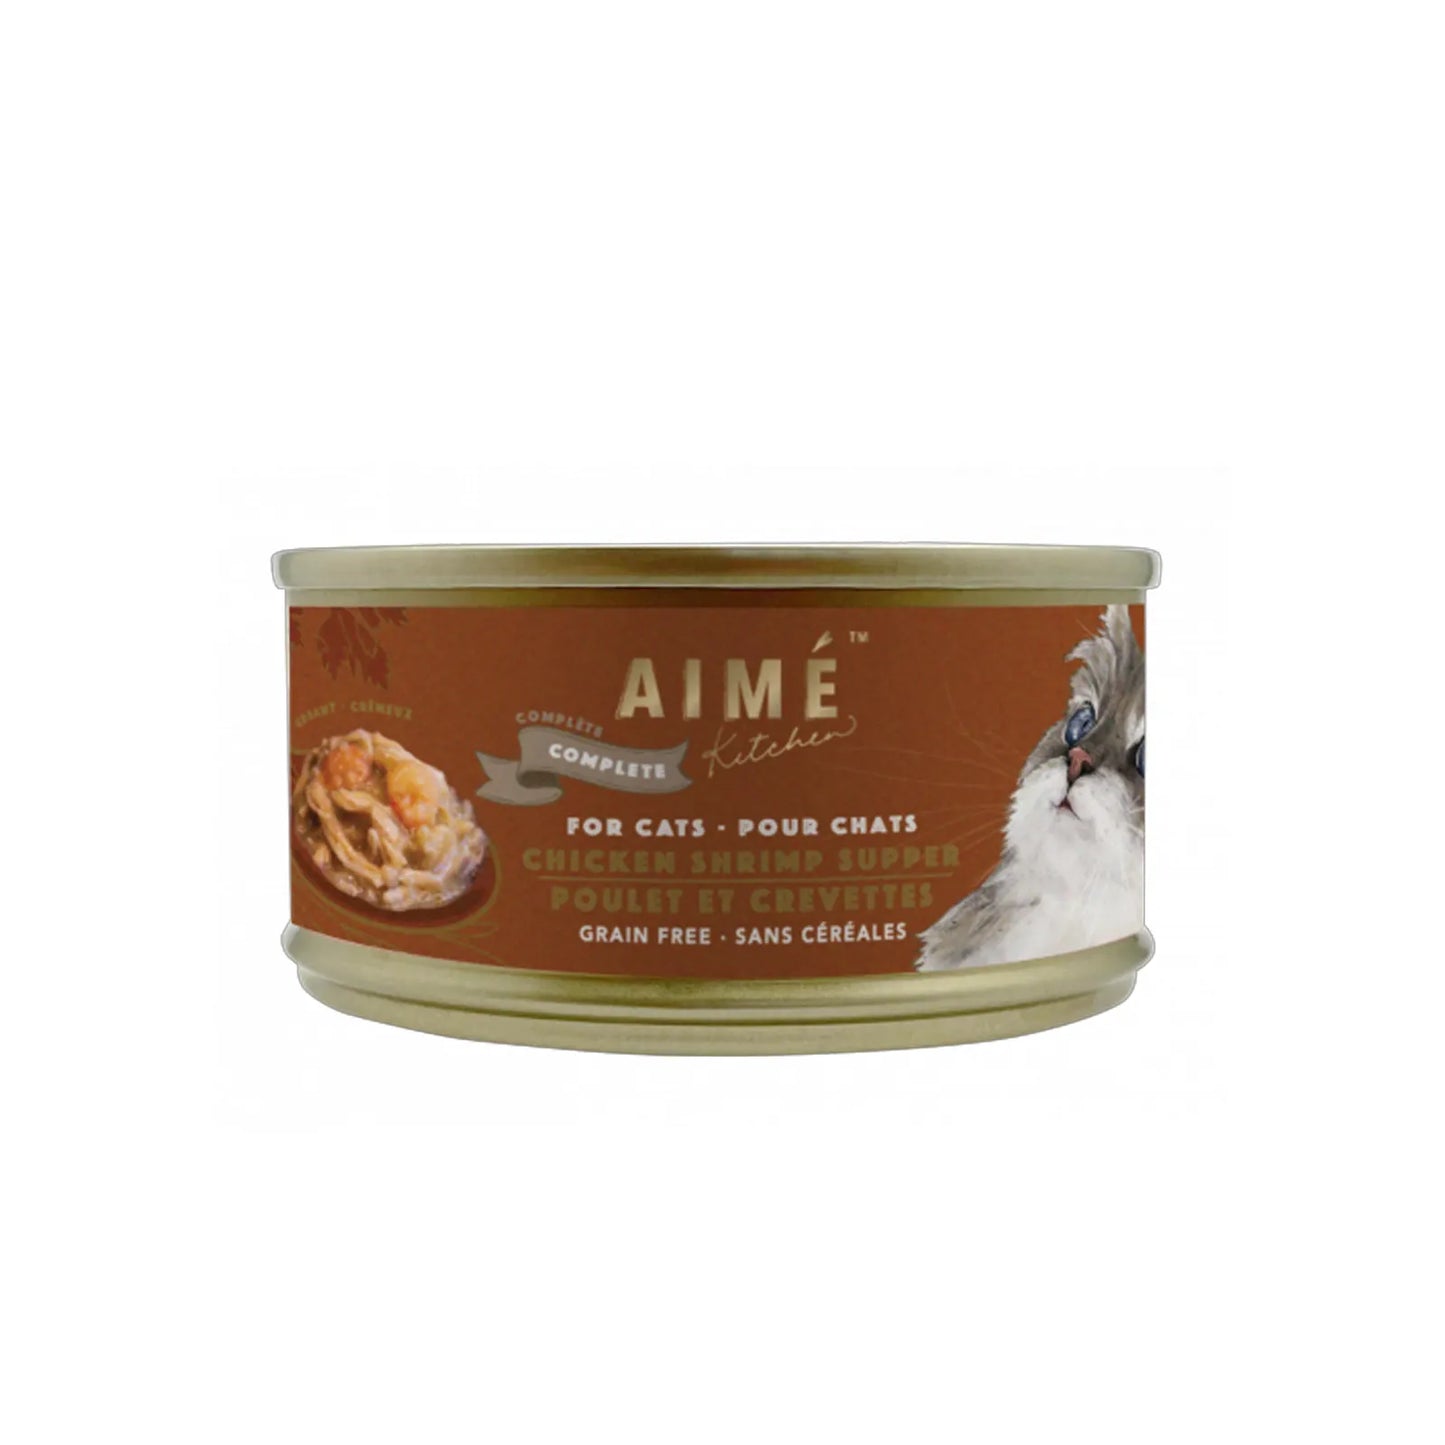 Aime Kitchen Classic Complete Cans For Cats - Chicken Shrimp Supper 85g